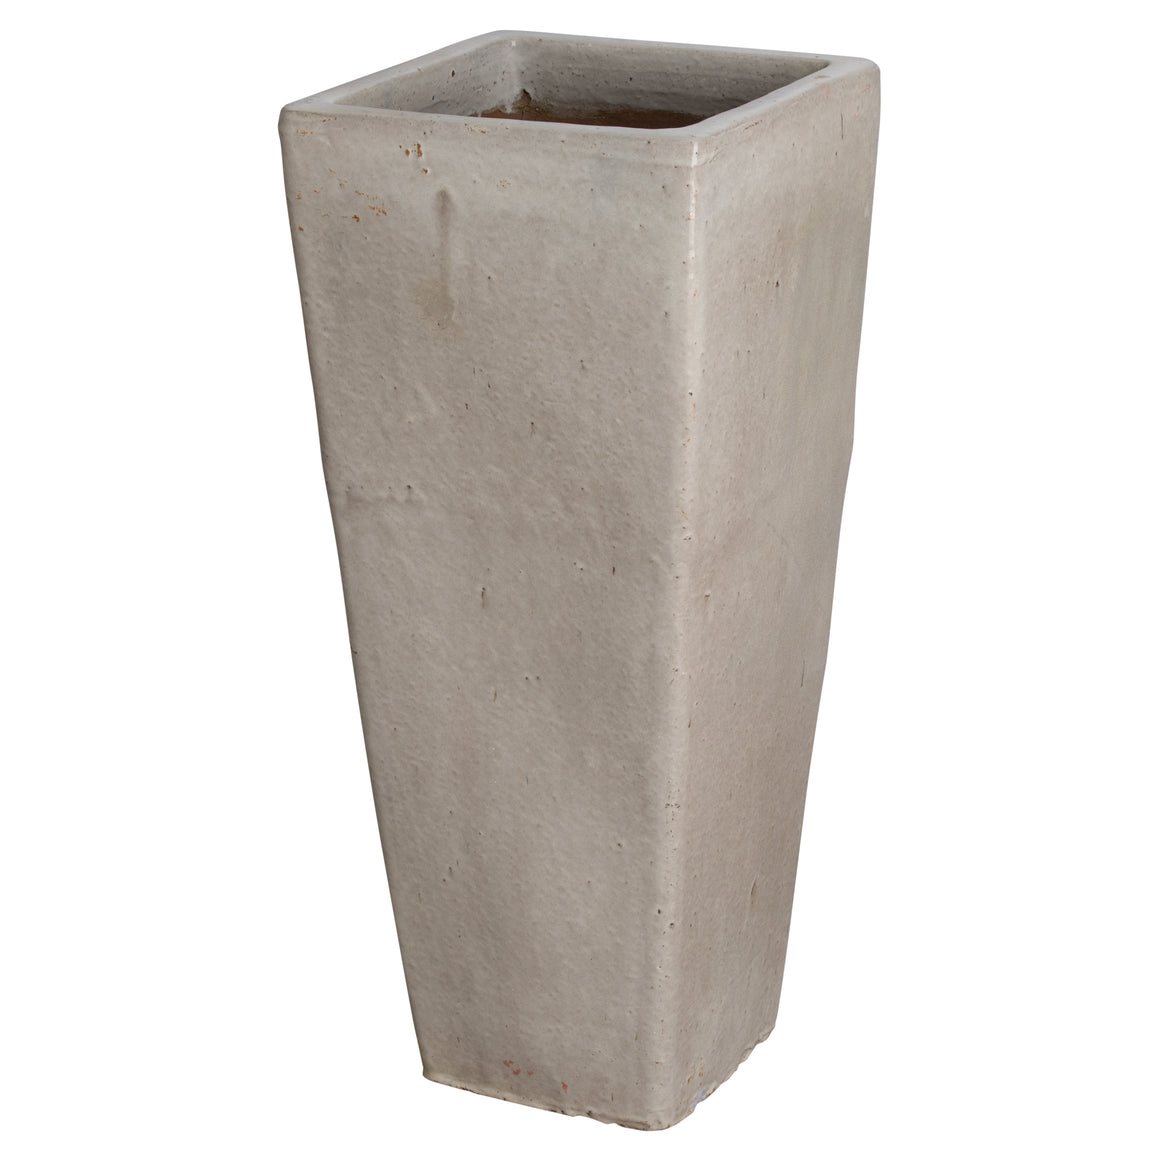 Tall Square Planter with Distressed White Glaze – Large